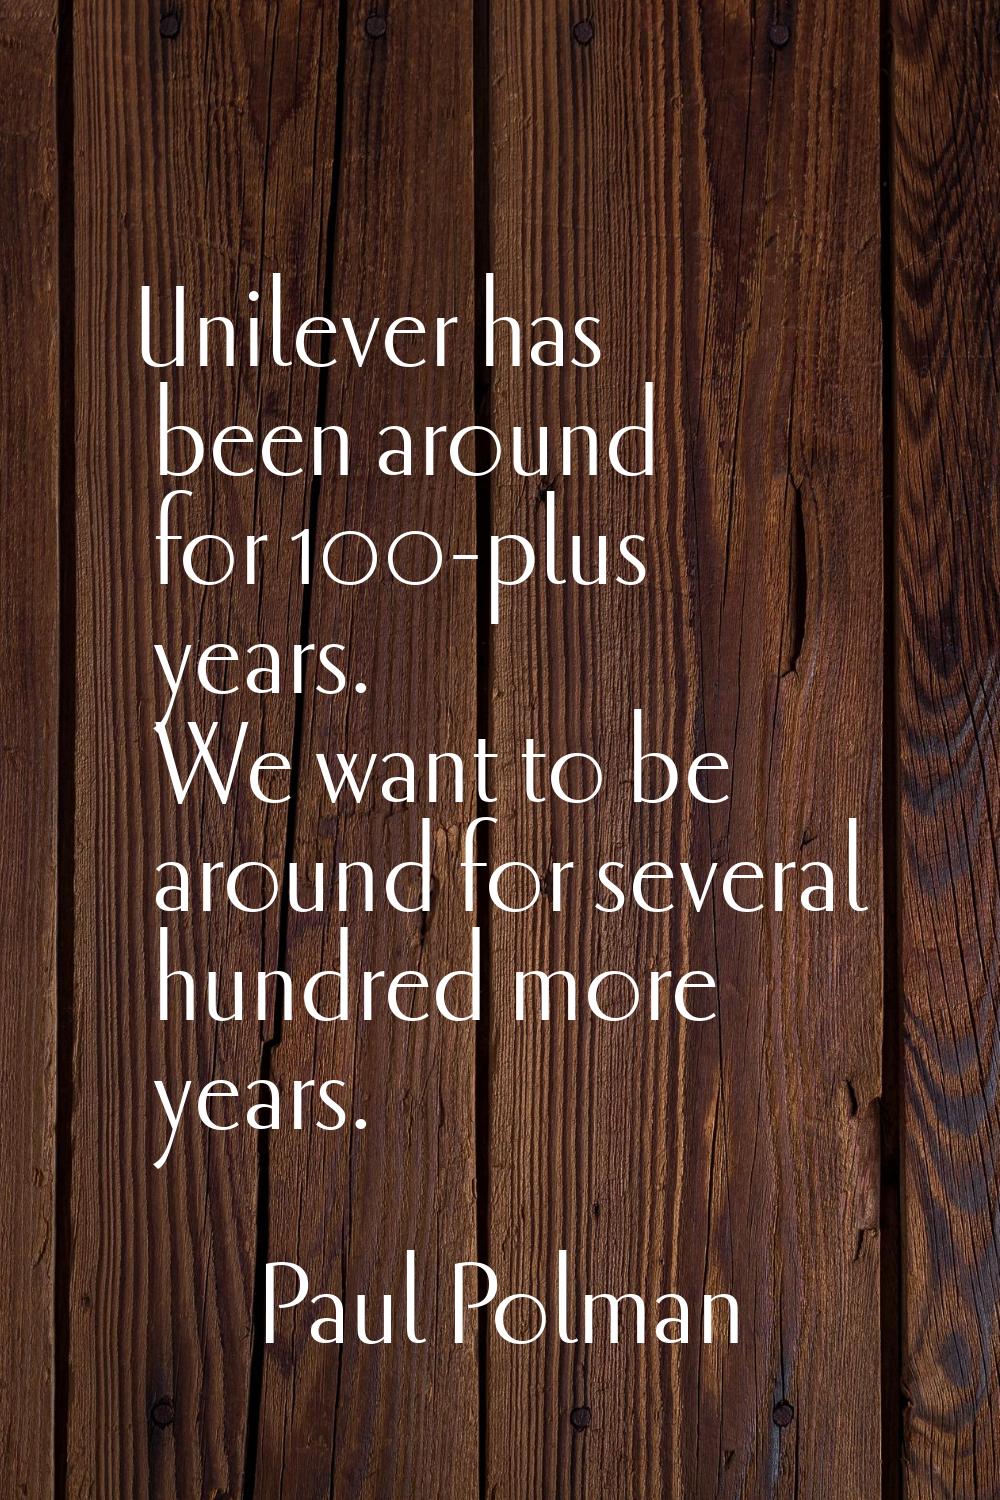 Unilever has been around for 100-plus years. We want to be around for several hundred more years.